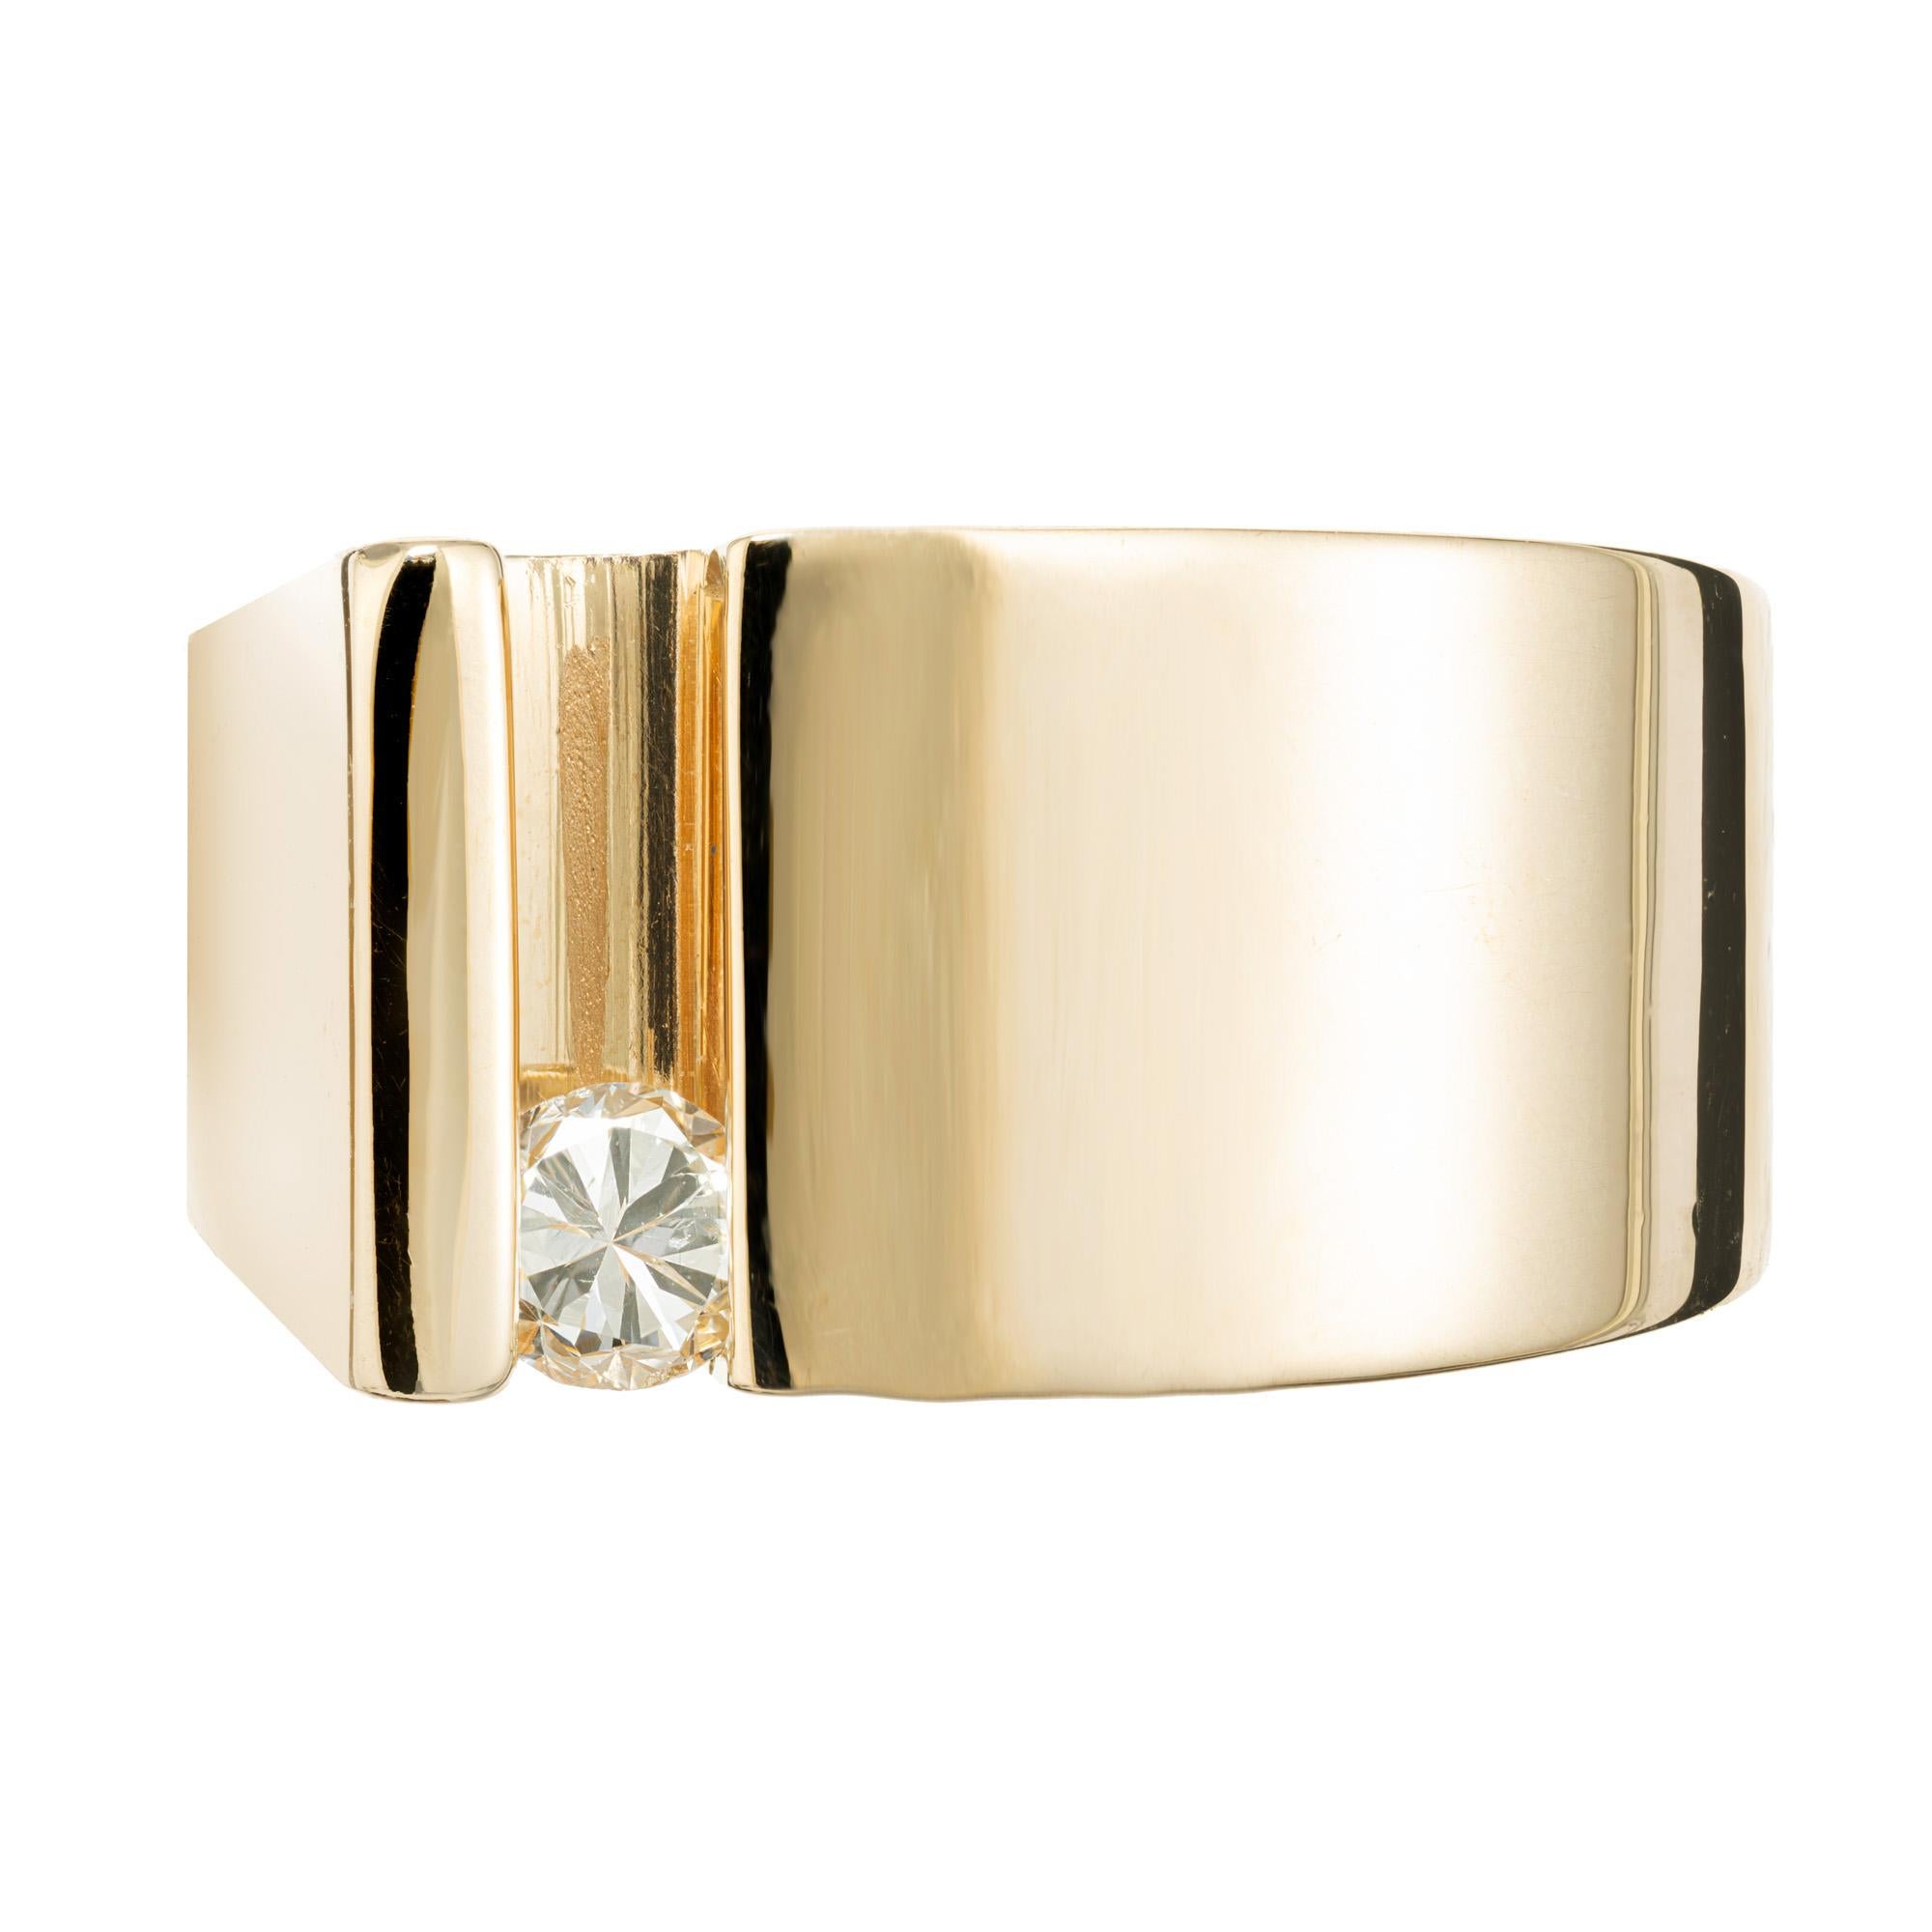 1970's modern design diamond slide 14k yellow gold ring that offers a unique and modern twist on a classic style. The single round diamond slides safely and securely back and forth as part of the design. The diamond has great brilliance with radiant